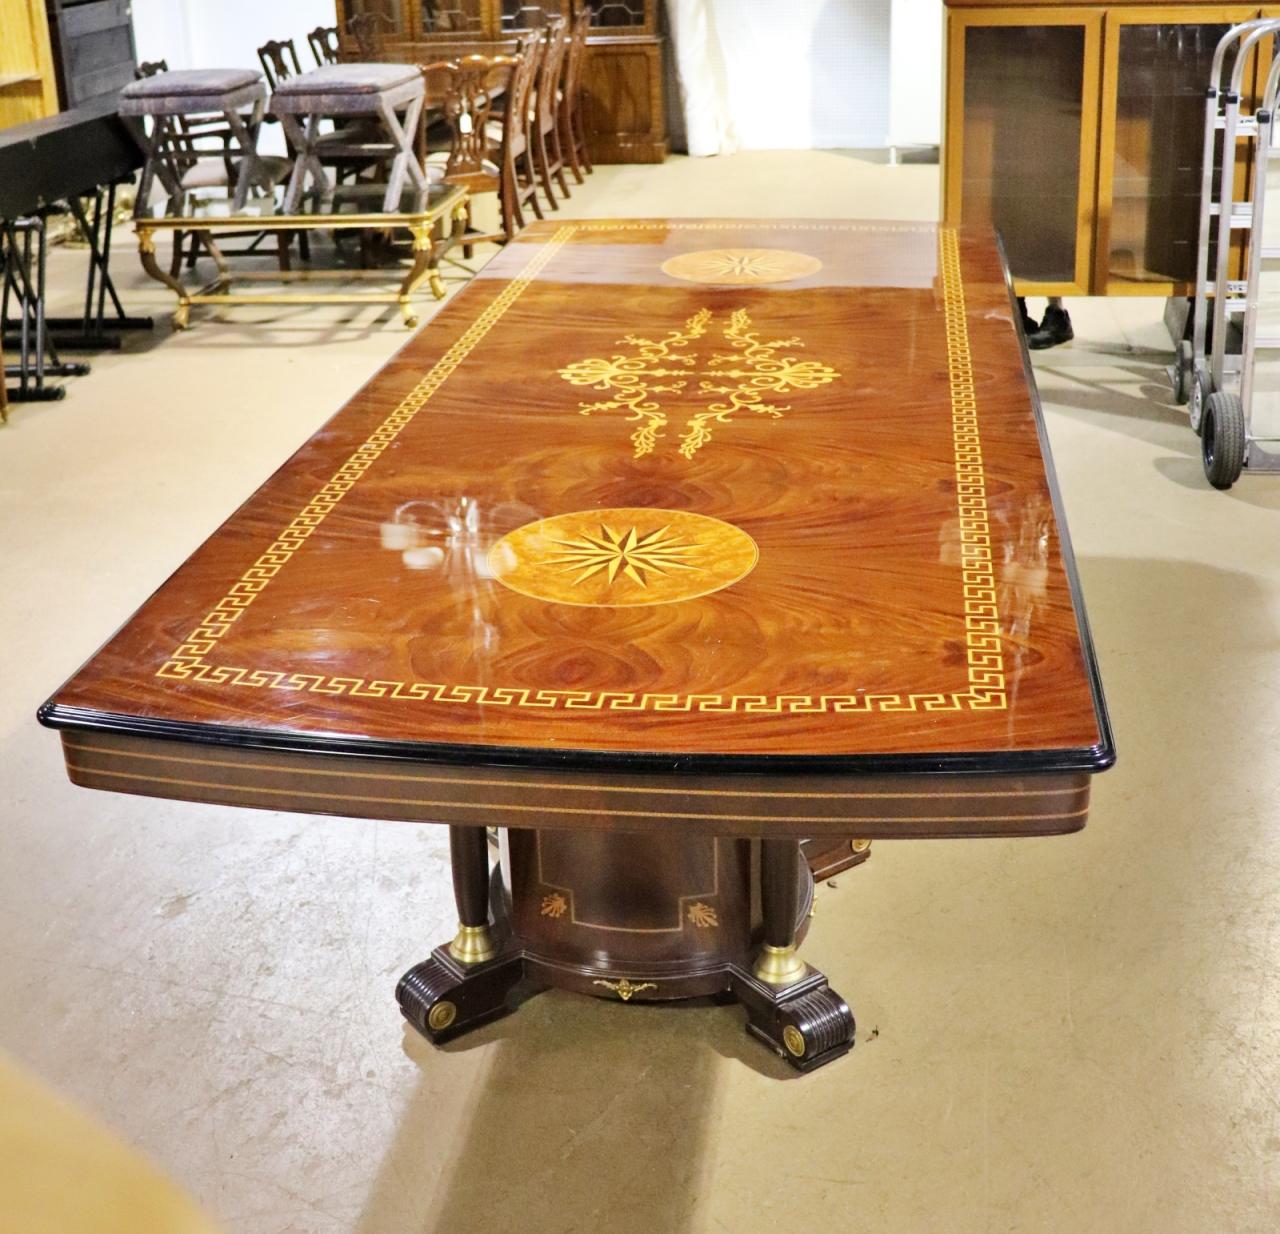 This is a spectacular dining table with mixed woods inlaid across a bed of fantastic flame mahogany veneer and bronze and ebonized elements. The table is a match to a set of 12 dining chairs we have listed separately. If you want the entire set, we